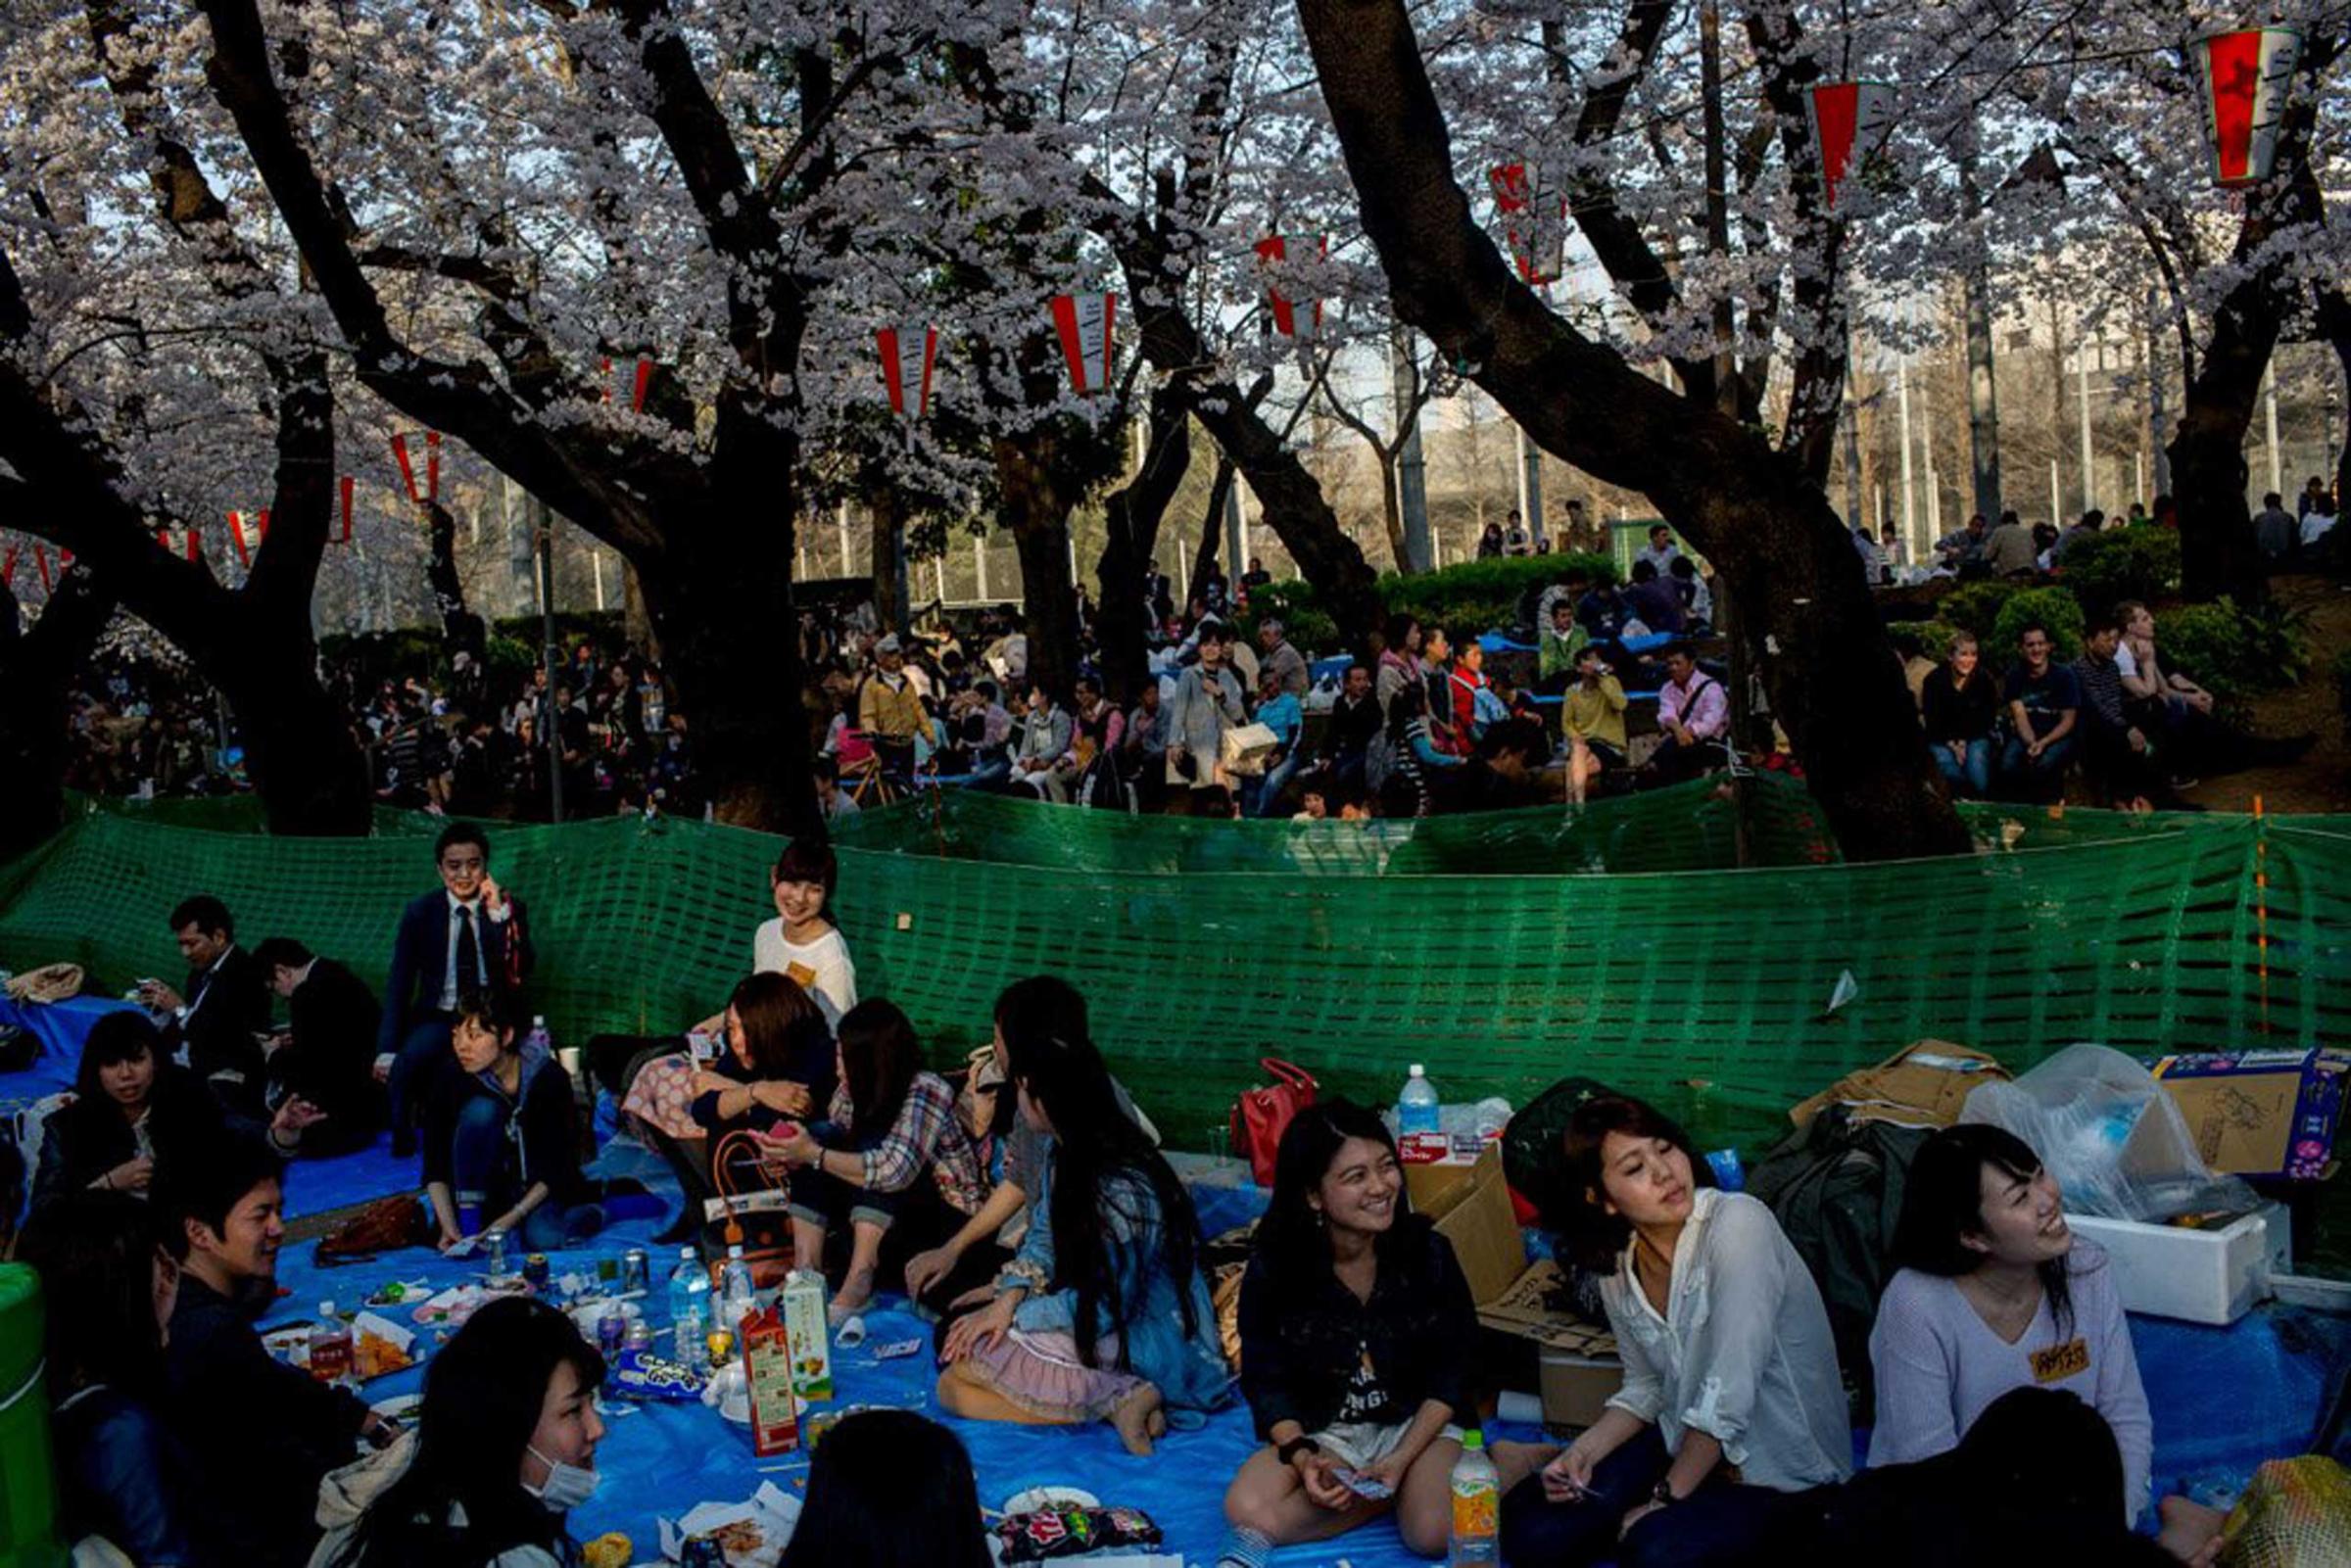 People take part in ' Hanami' or Flower-viewing parties under cherry blossom trees in full bloom in Ueno Park in Tokyo on March 30, 2015.